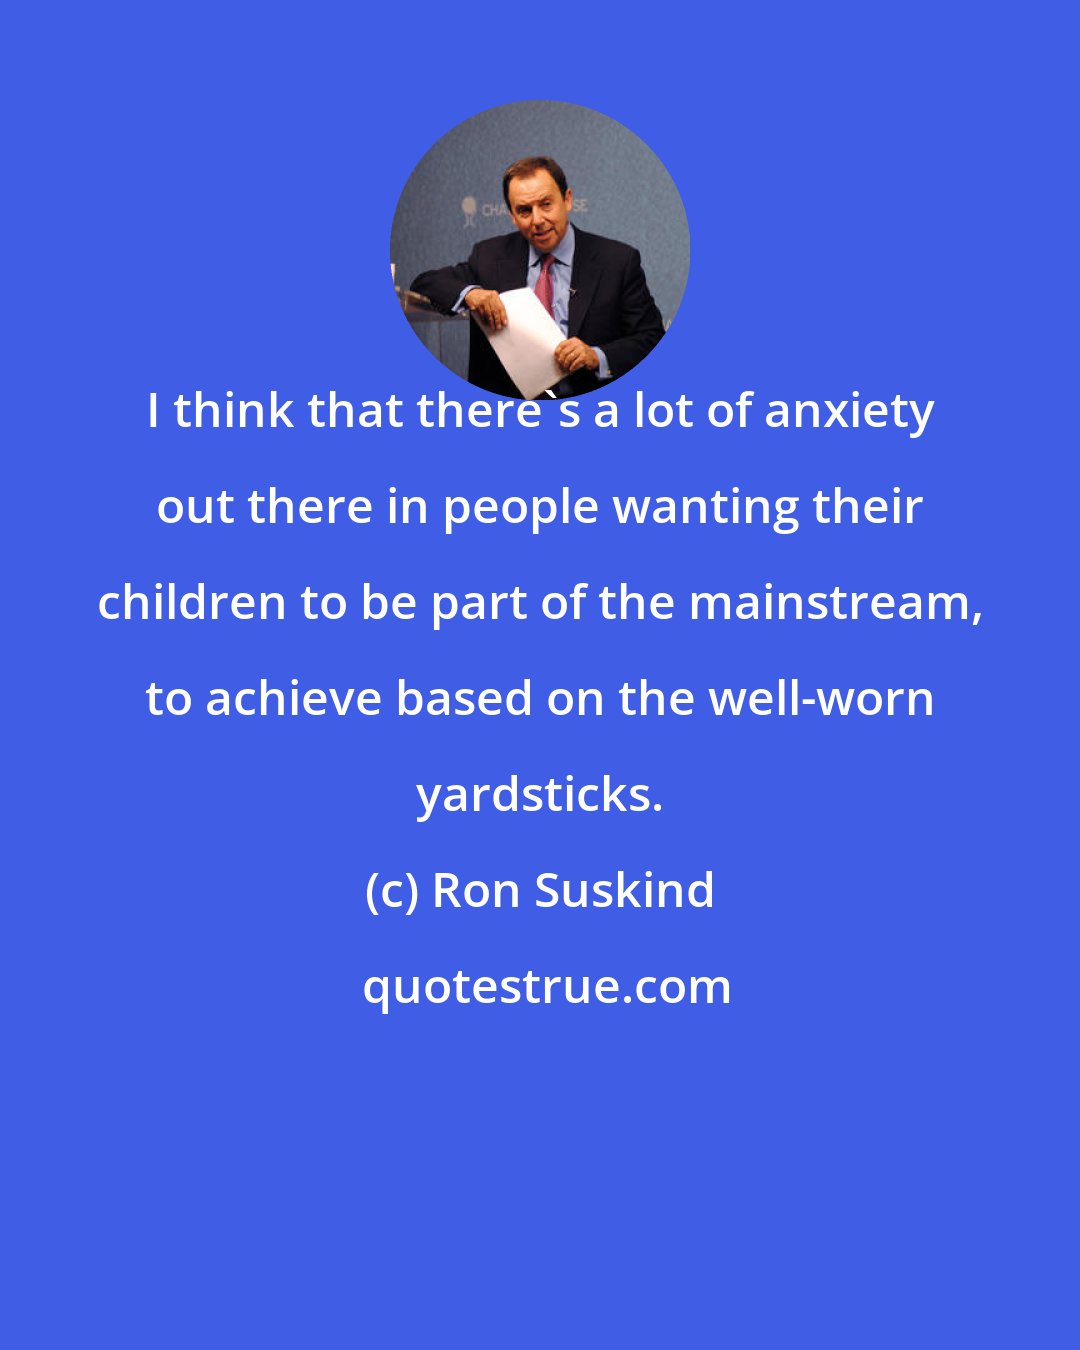 Ron Suskind: I think that there's a lot of anxiety out there in people wanting their children to be part of the mainstream, to achieve based on the well-worn yardsticks.